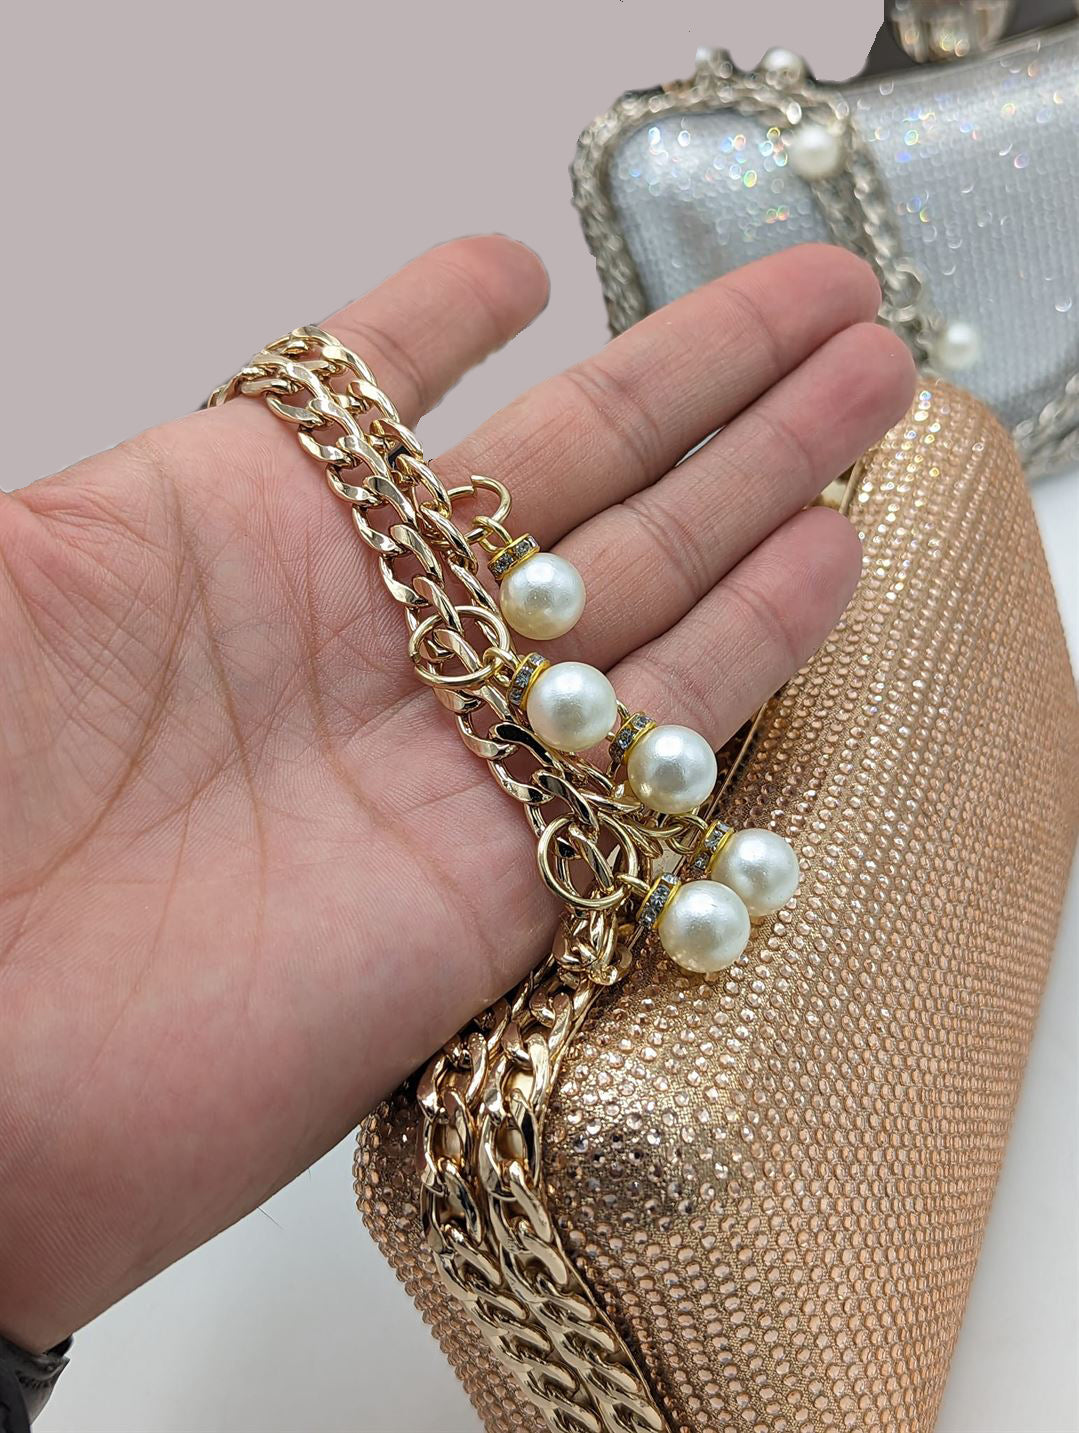 New 2024 Trend Women's Evening Clutch Bag Shiny Crystal Exquisite Chain Wedding Clutch